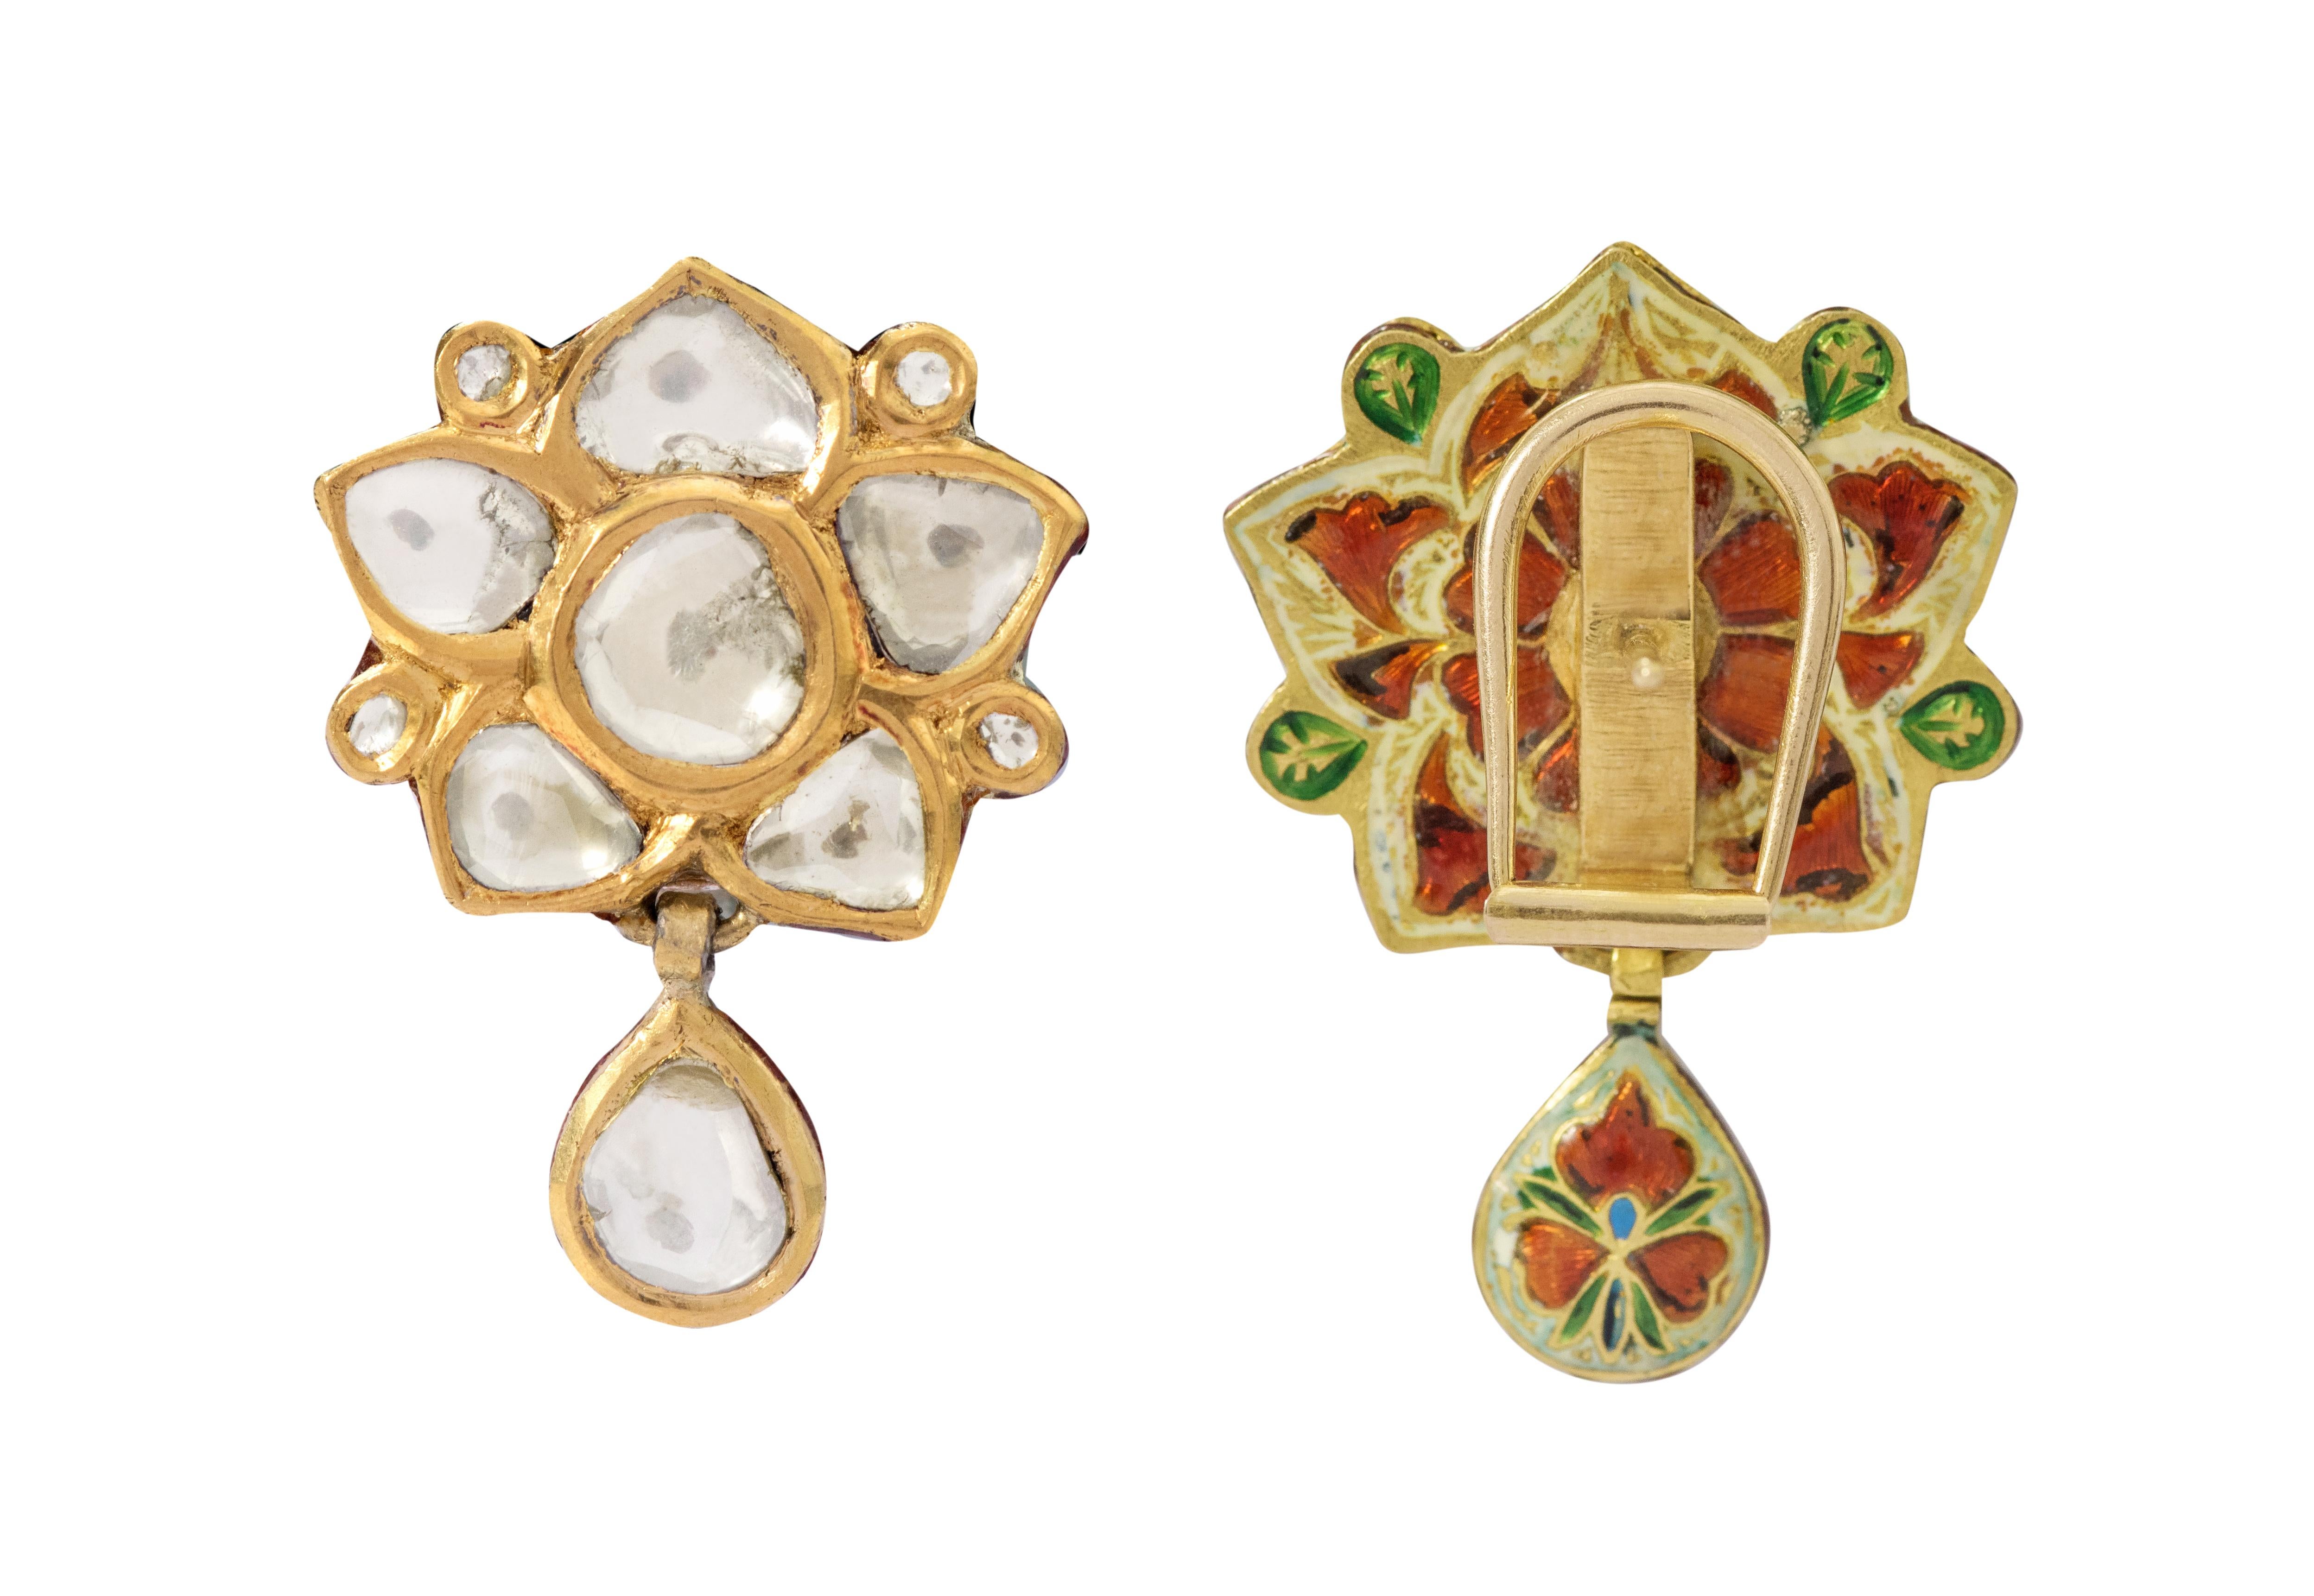 22 Karat Yellow Gold Diamond Stud Earring Handcrafted with Multi-Color Enamel Work

This royal Mughal era hand-made floral polki diamond earring is alluring. The top part of the earring is formed of special broad and long pear shape flat polki